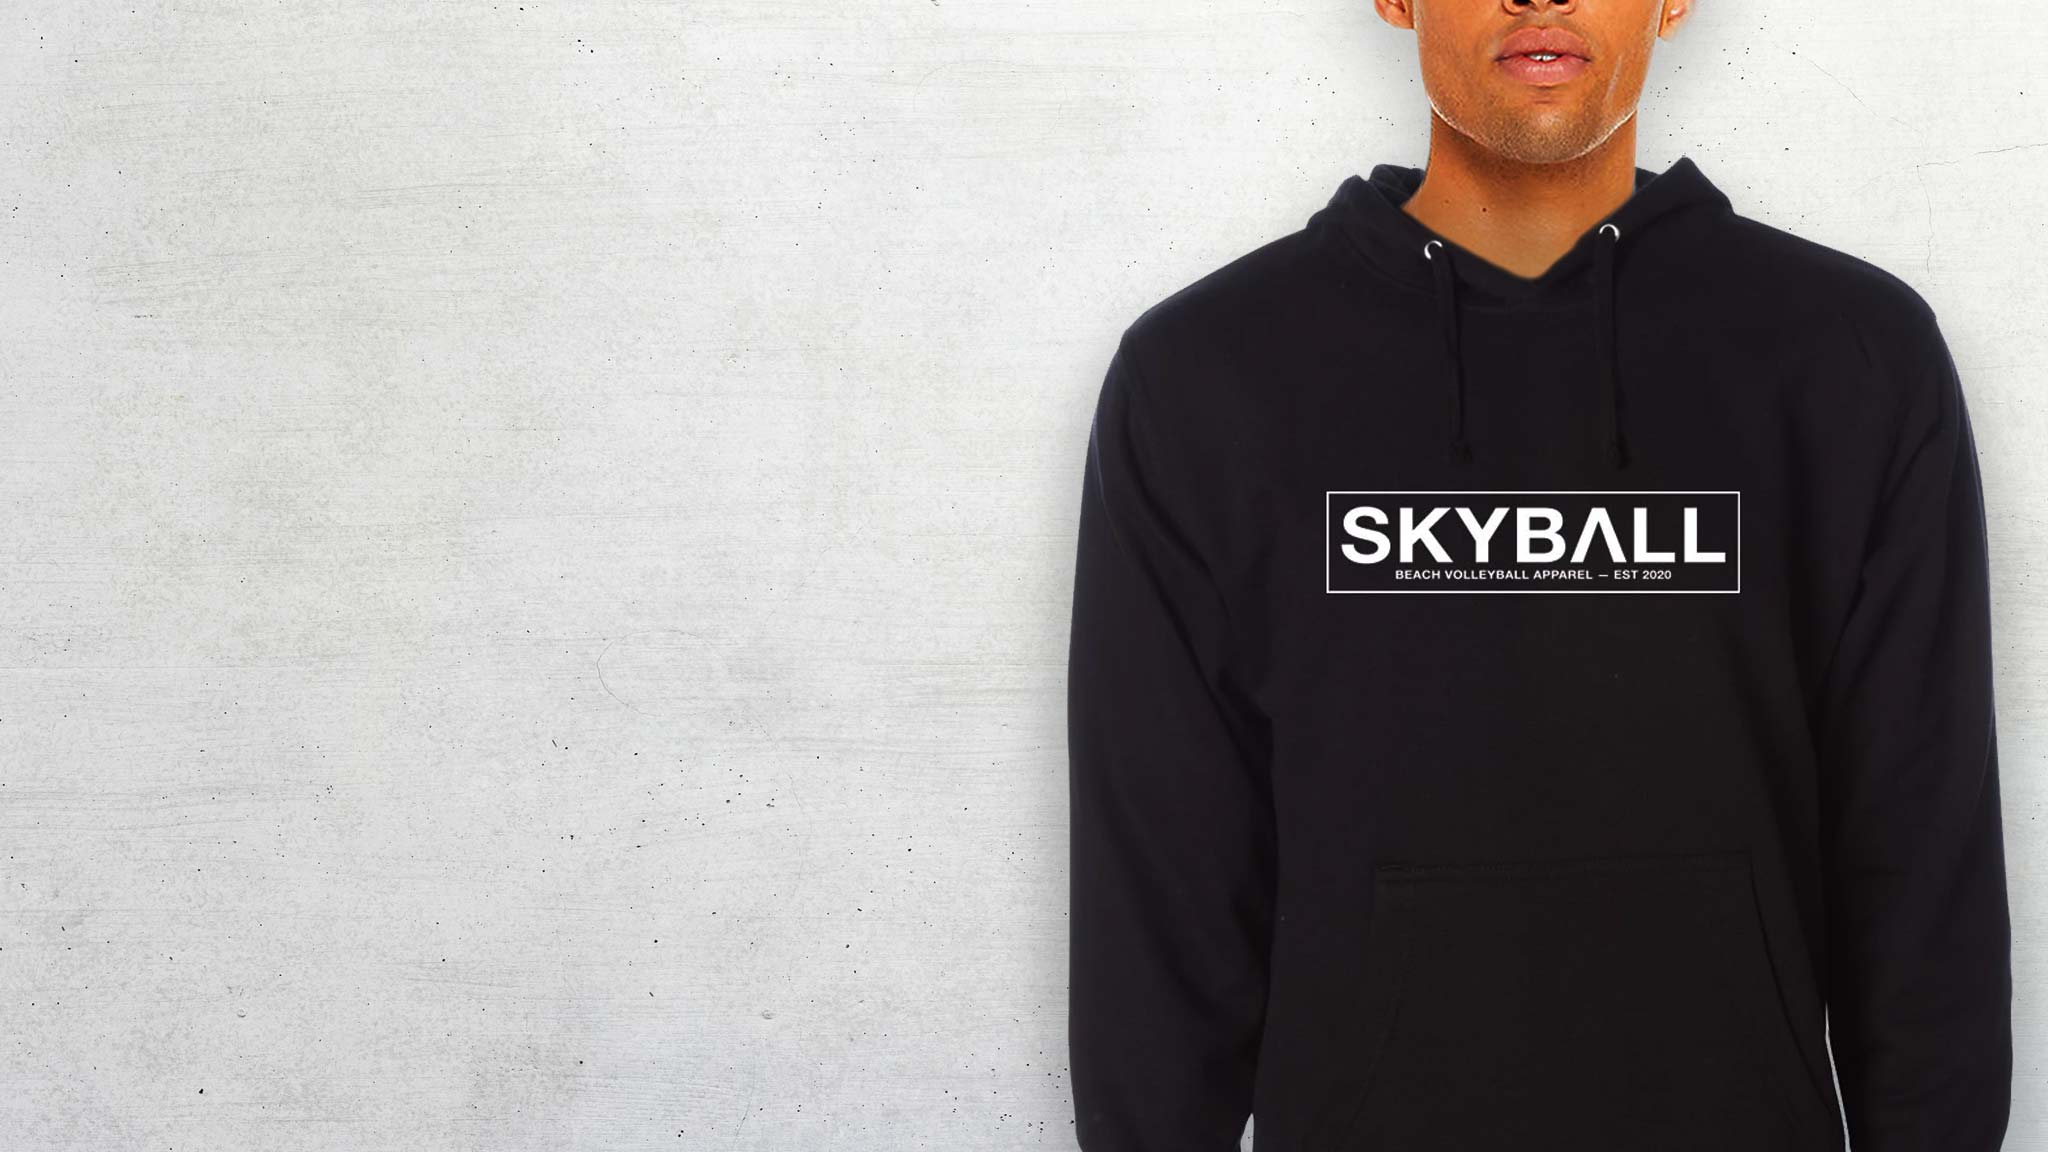 Skyball Apparel: The Perfect Choice for Beach Volleyball Clothing